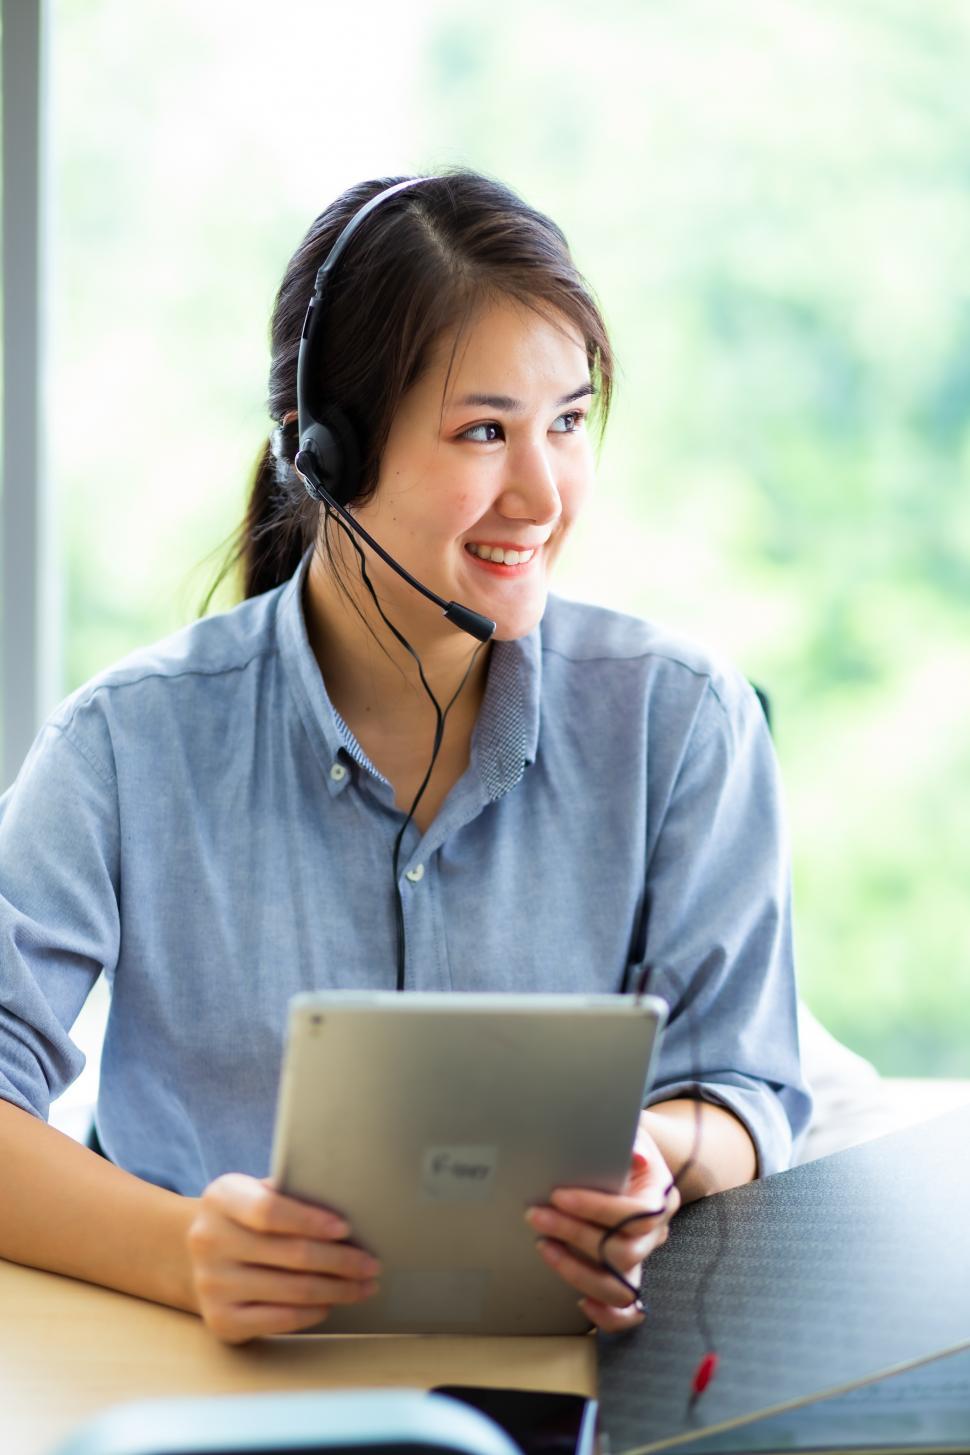 Free Image of Asian woman in headset smiling 